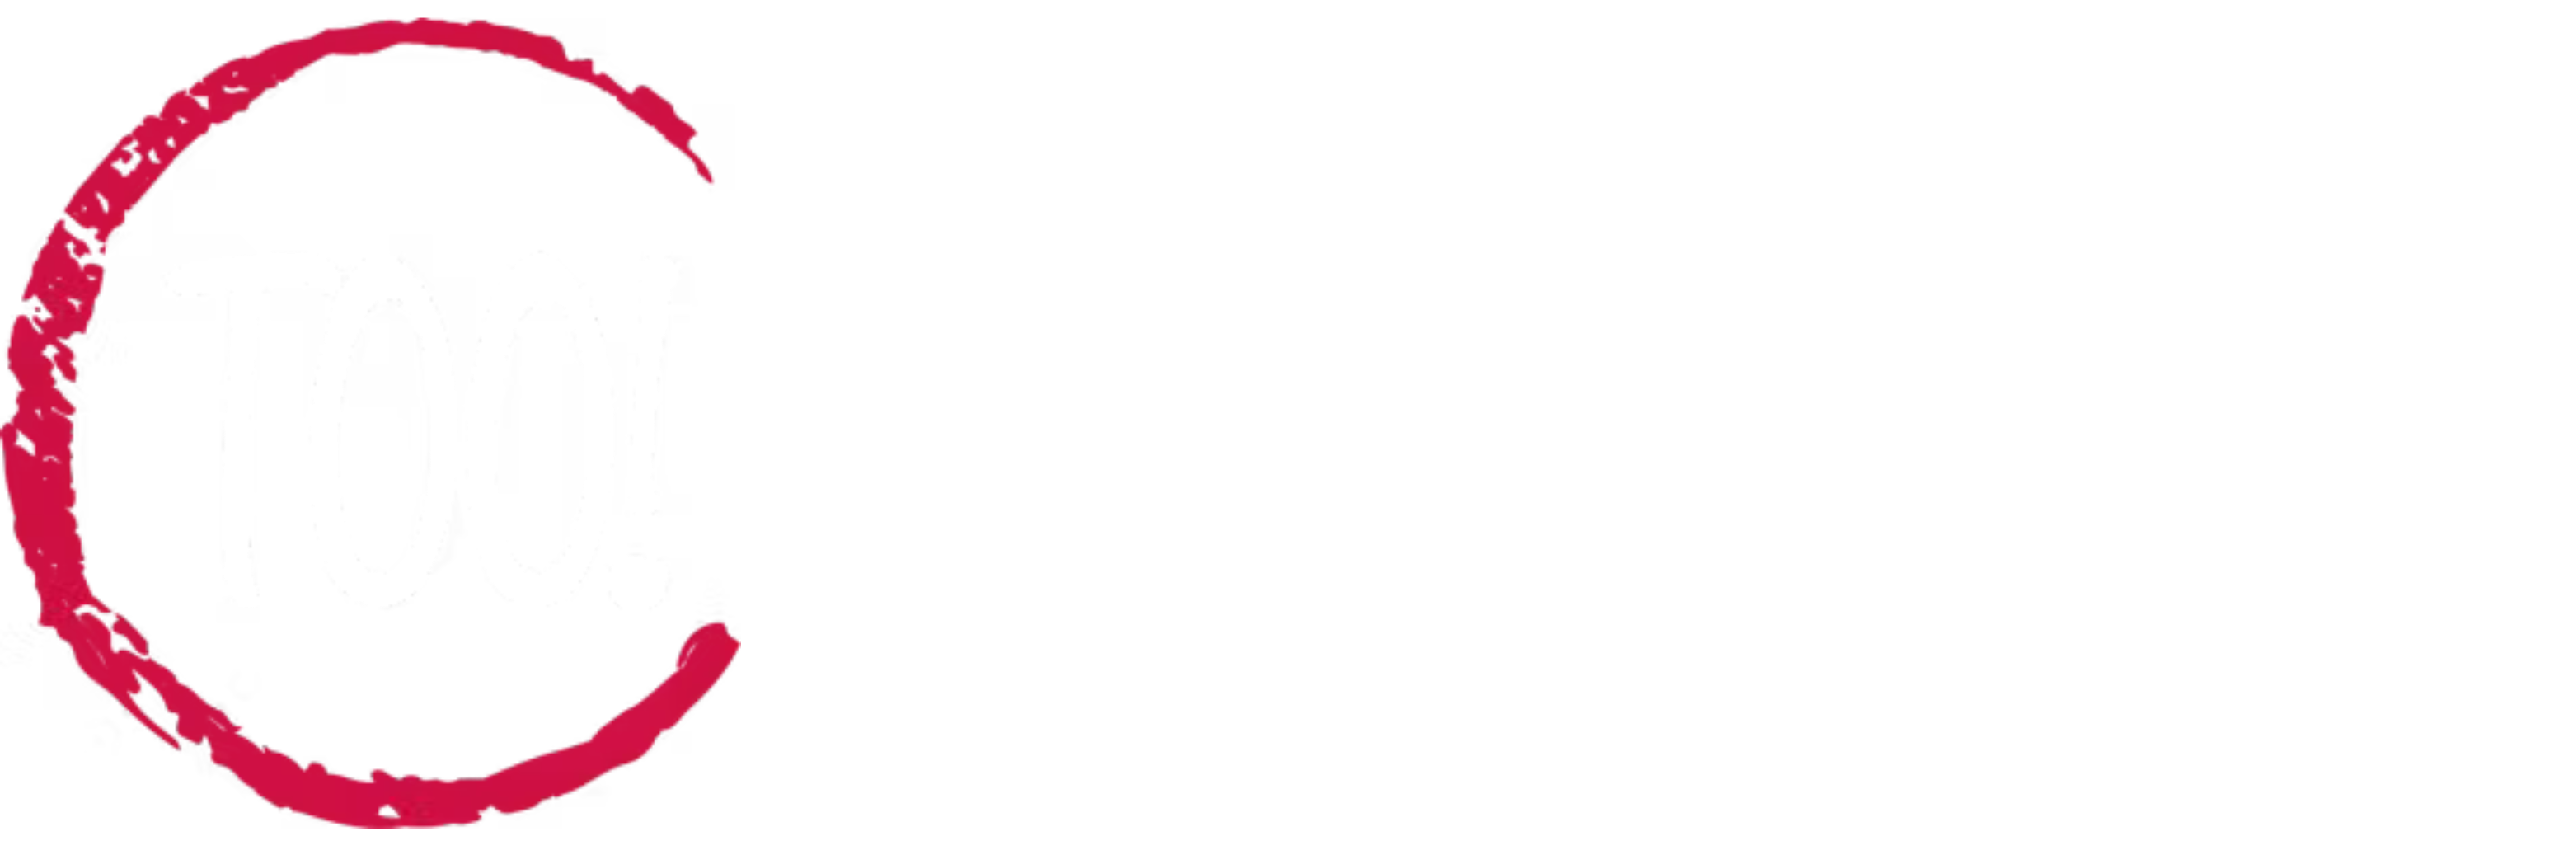 Catered Too, Inc. Home